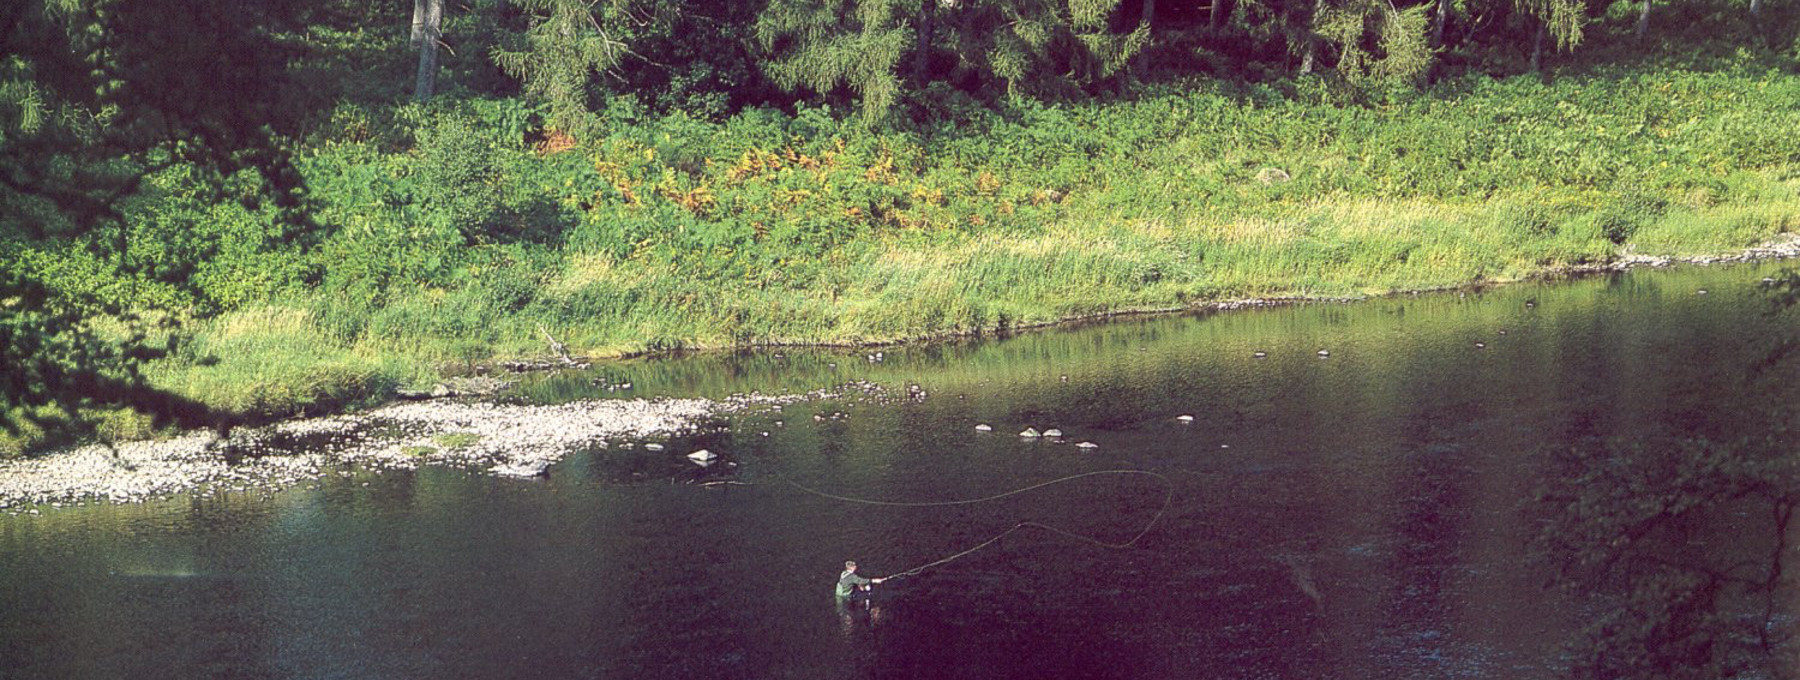 Fly fishing on the River Tay at Murthly estate - Fly fishing is ideal along the River Tay at Murthly Estate in Perthshire